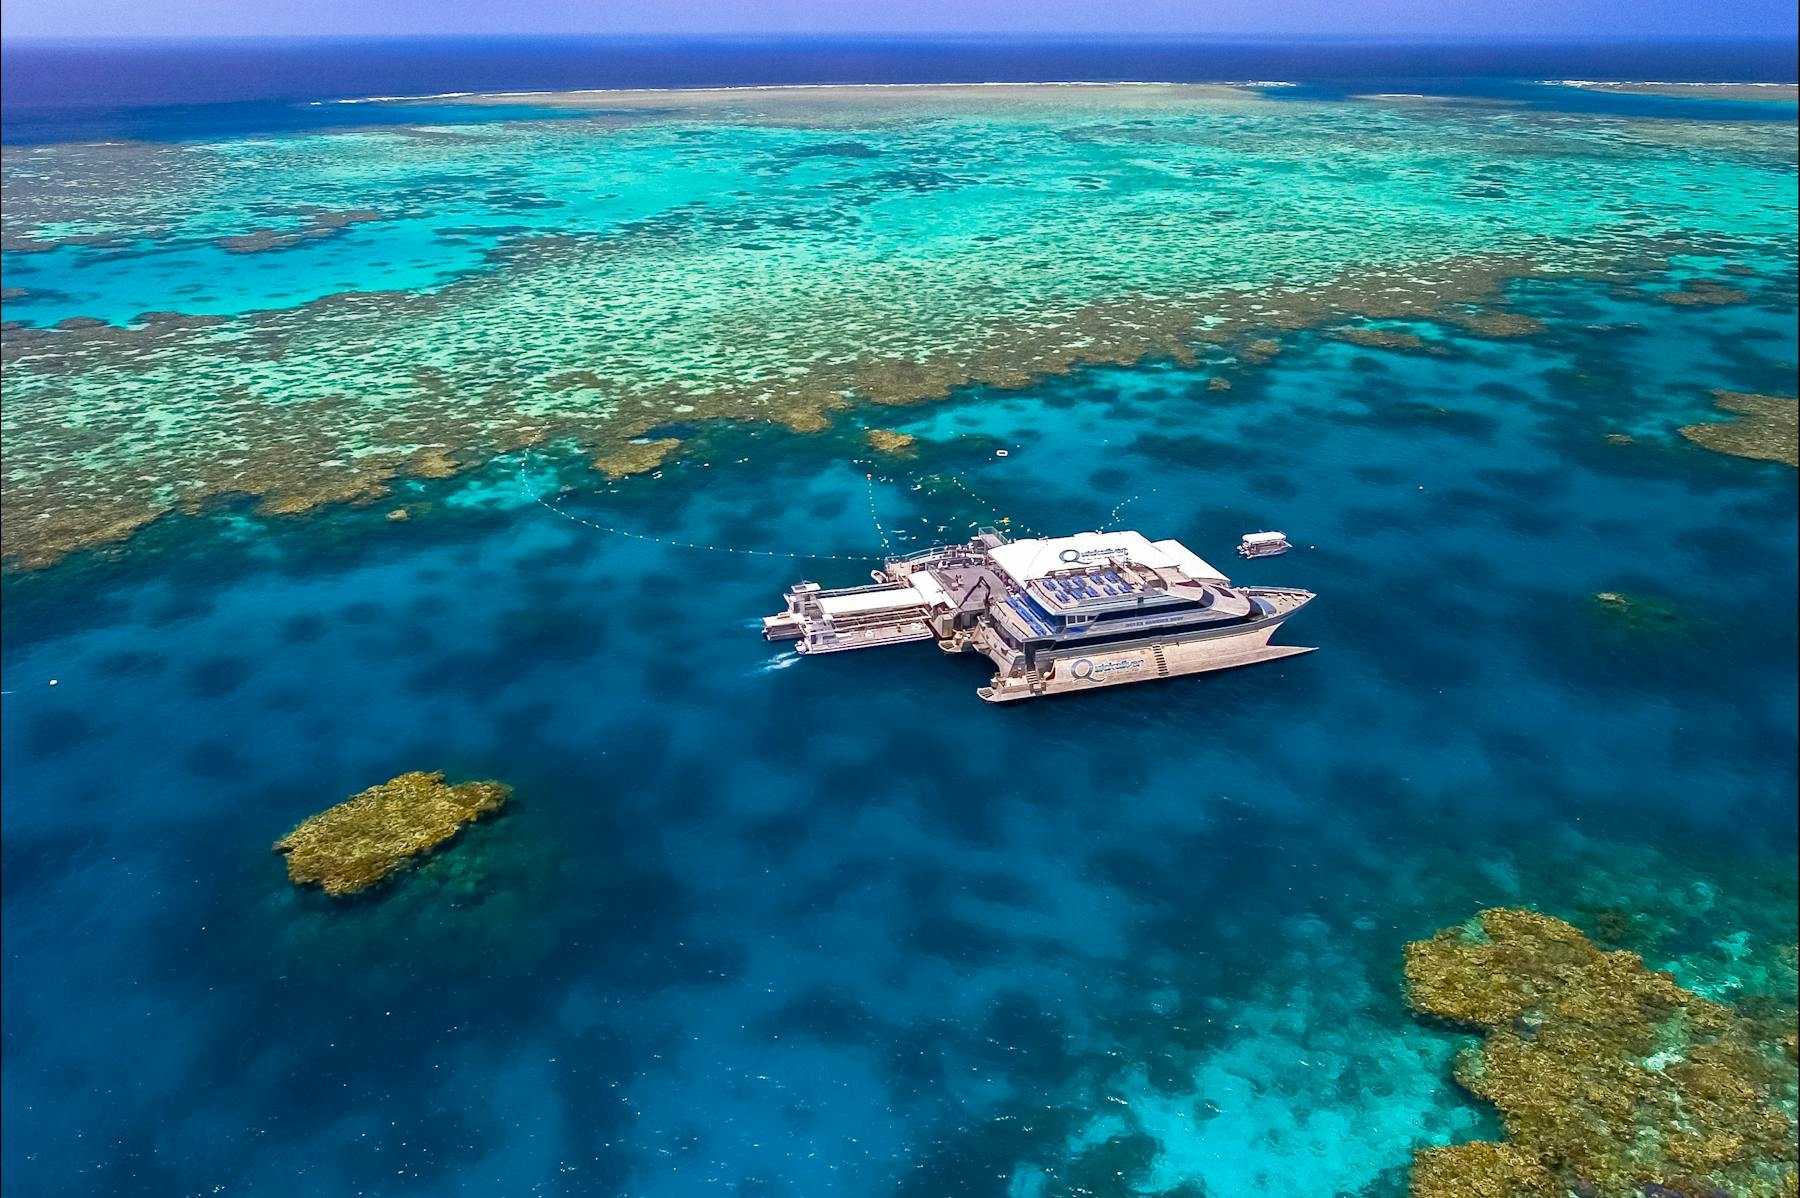 Quicksilver Cruises Great Barrier Reef